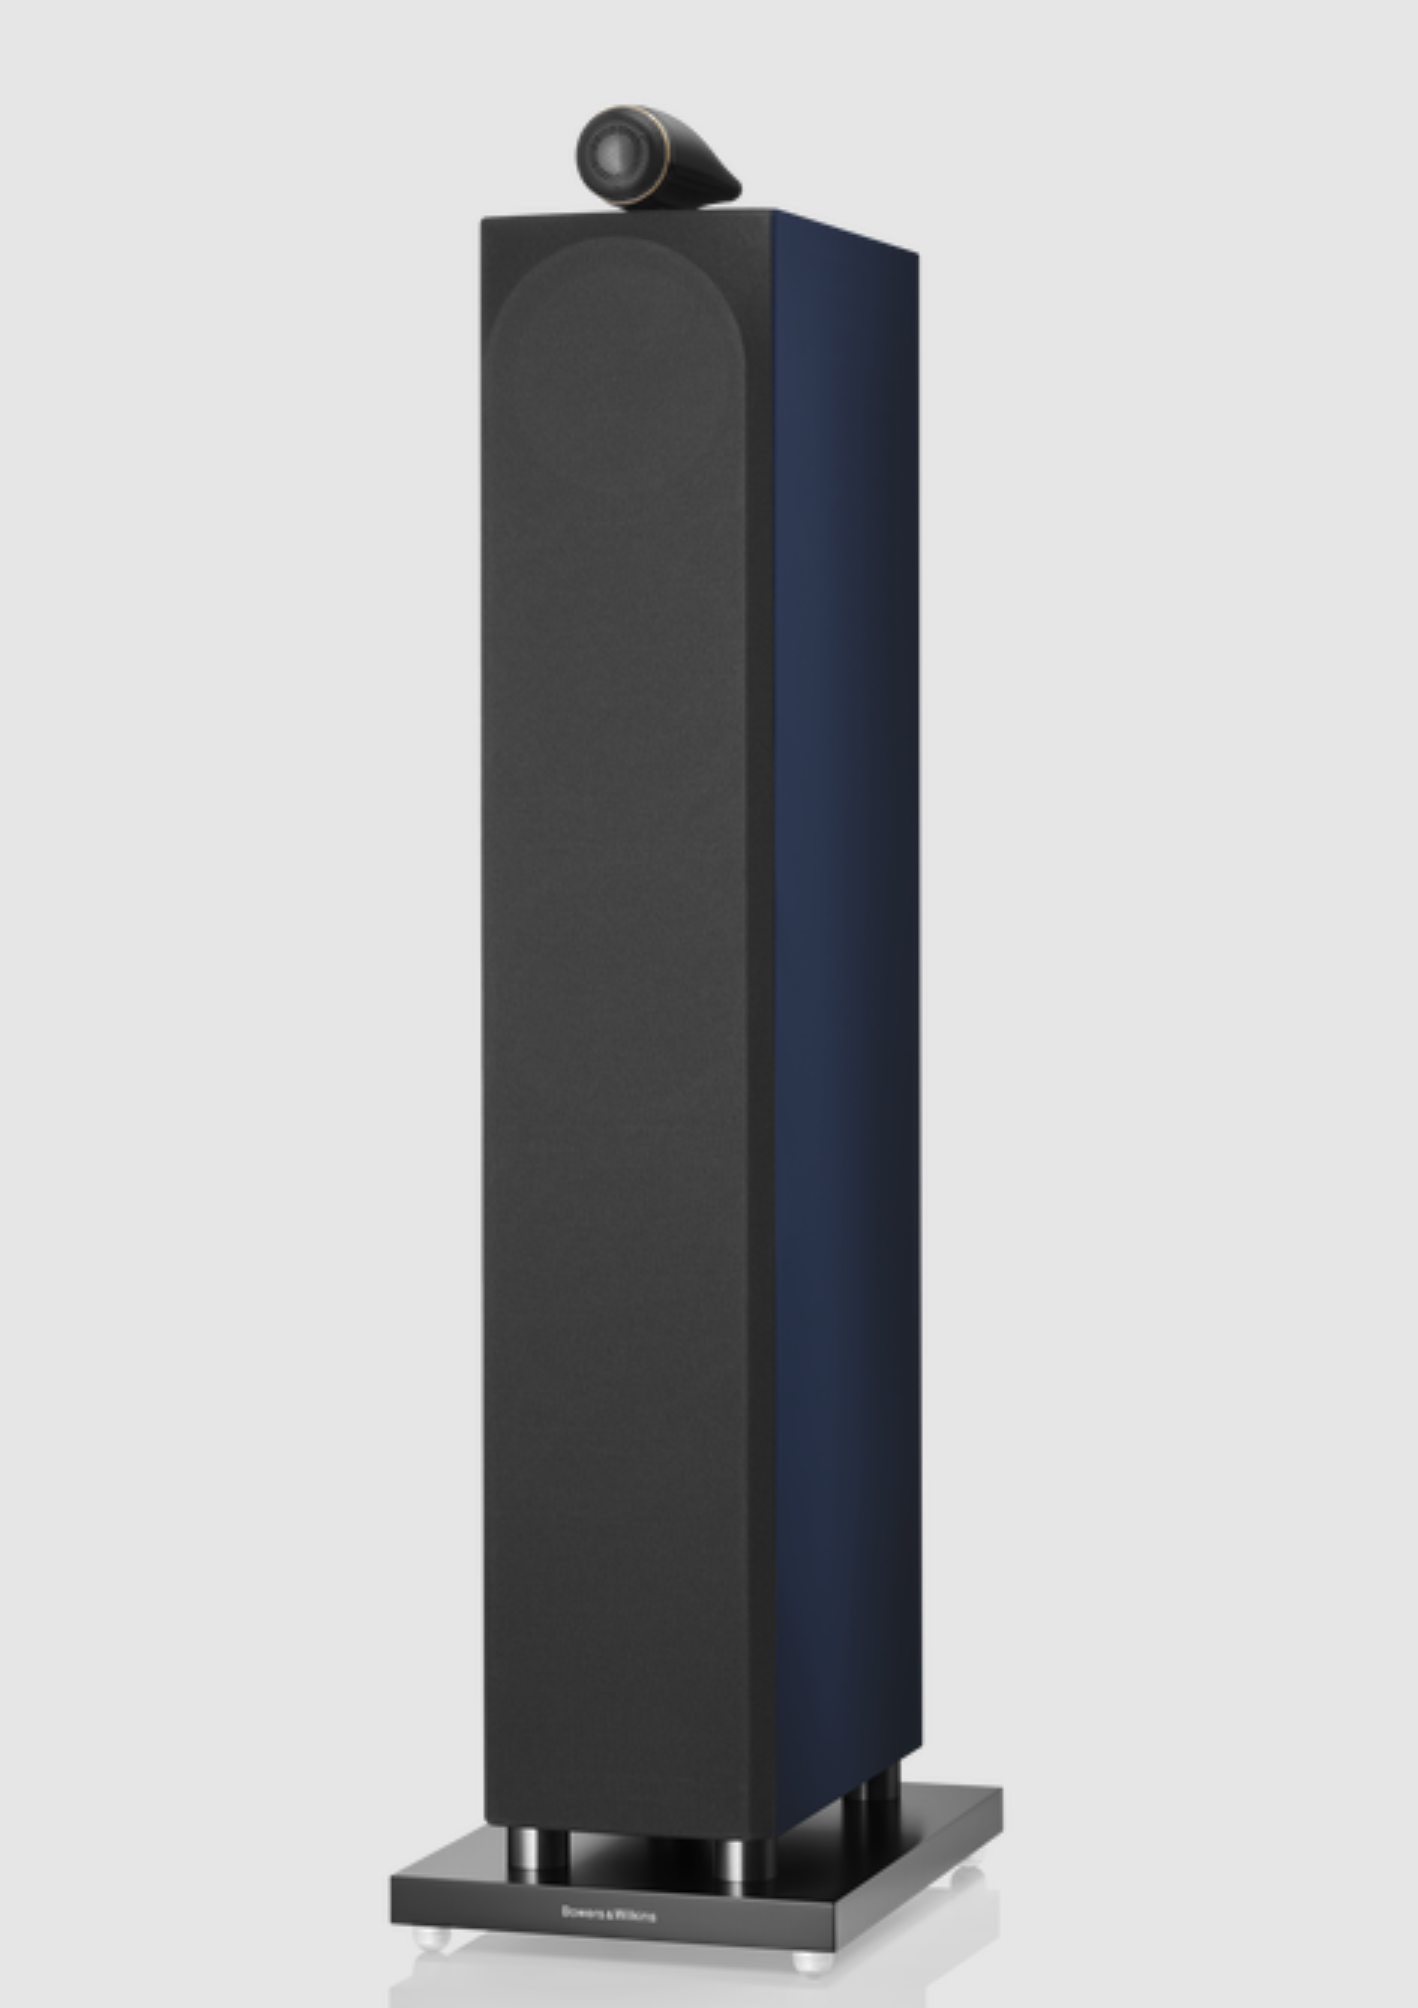 Bowers & Wilkins 702 S3 Signature Floorstanders in Midnight Blue Metallic. Image shows front and side of speaker with grille